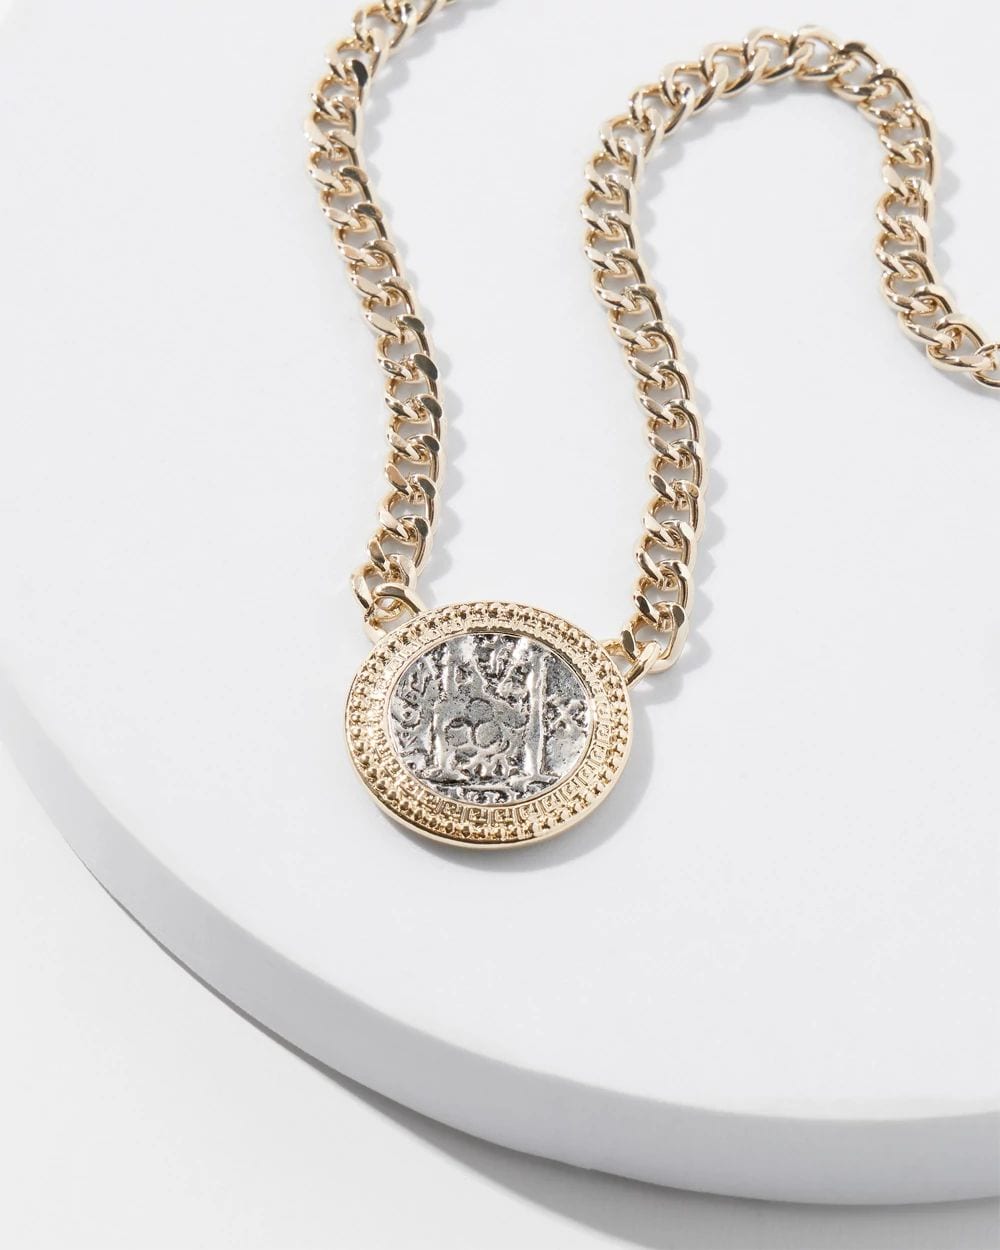 Mixed-Metal Coin Short Necklace click to view larger image.